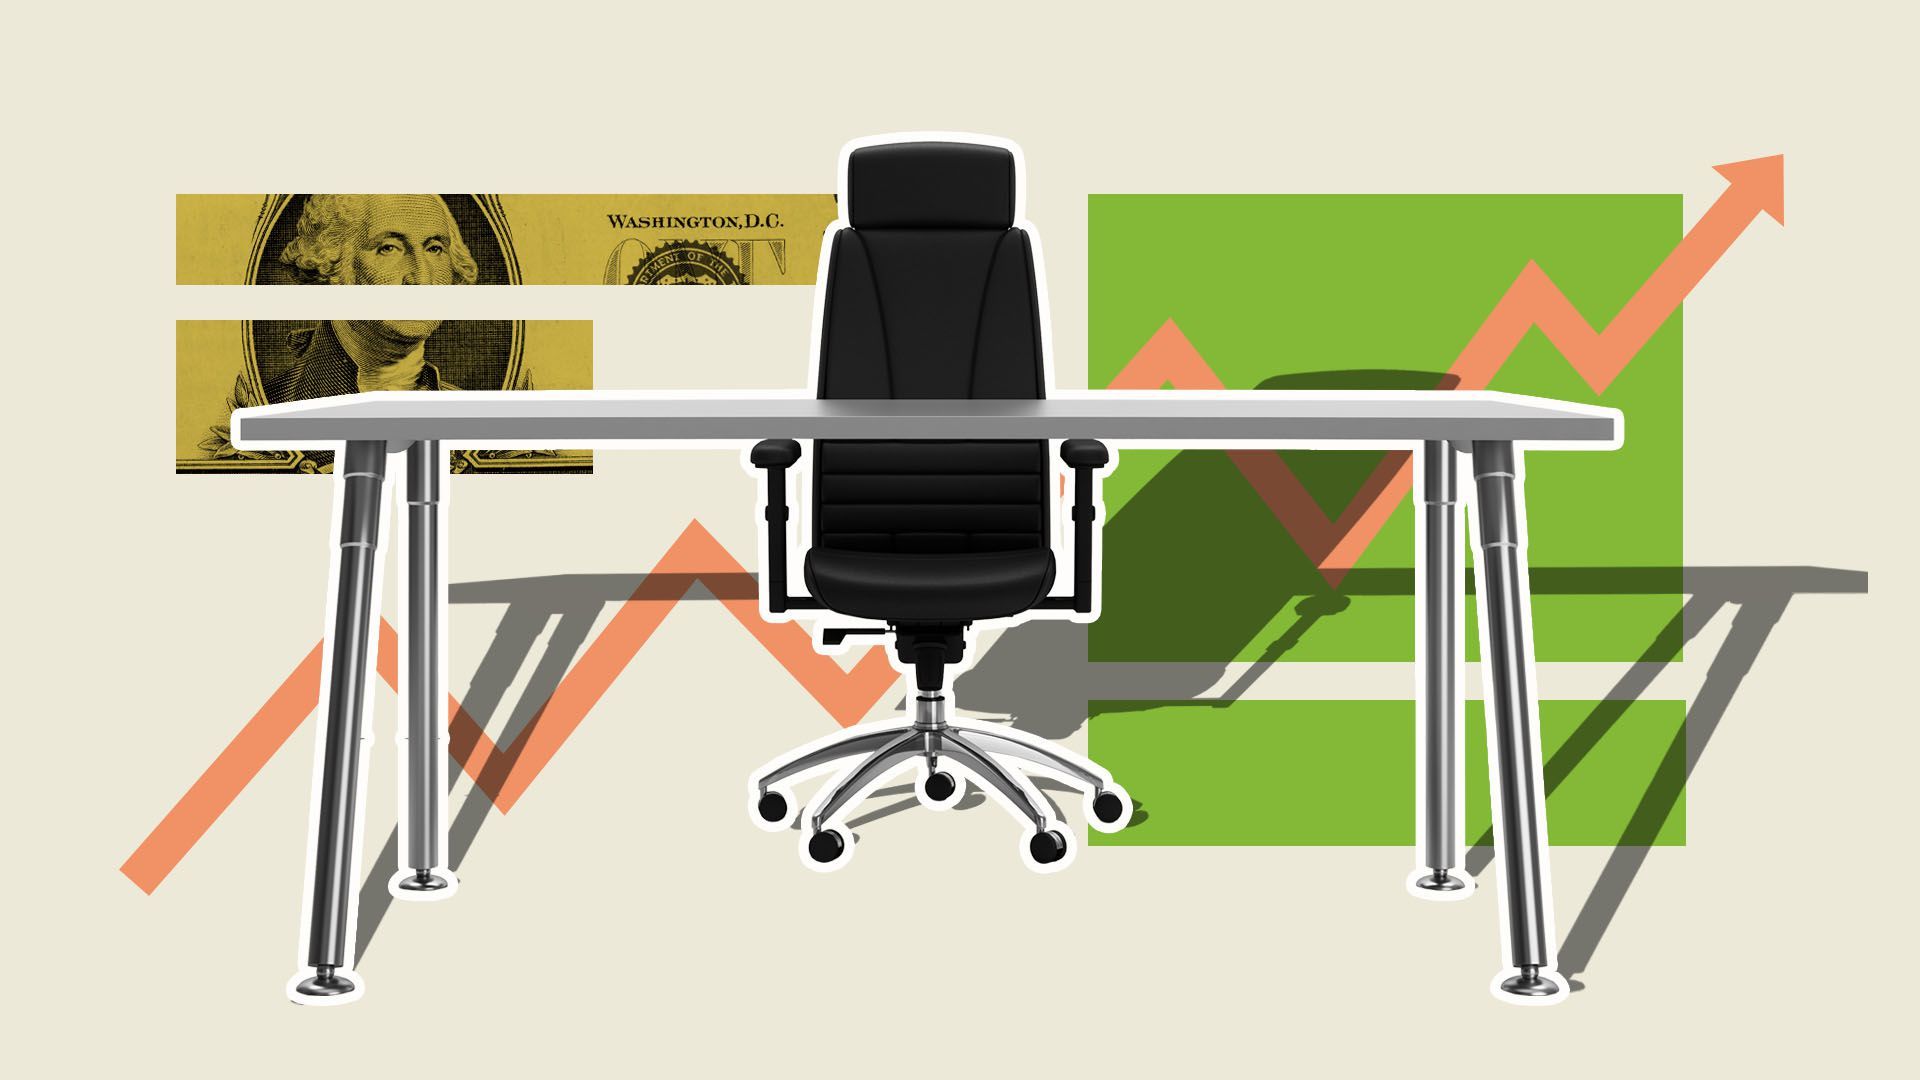 Illustration of a desk with a upward trending line chart behind it